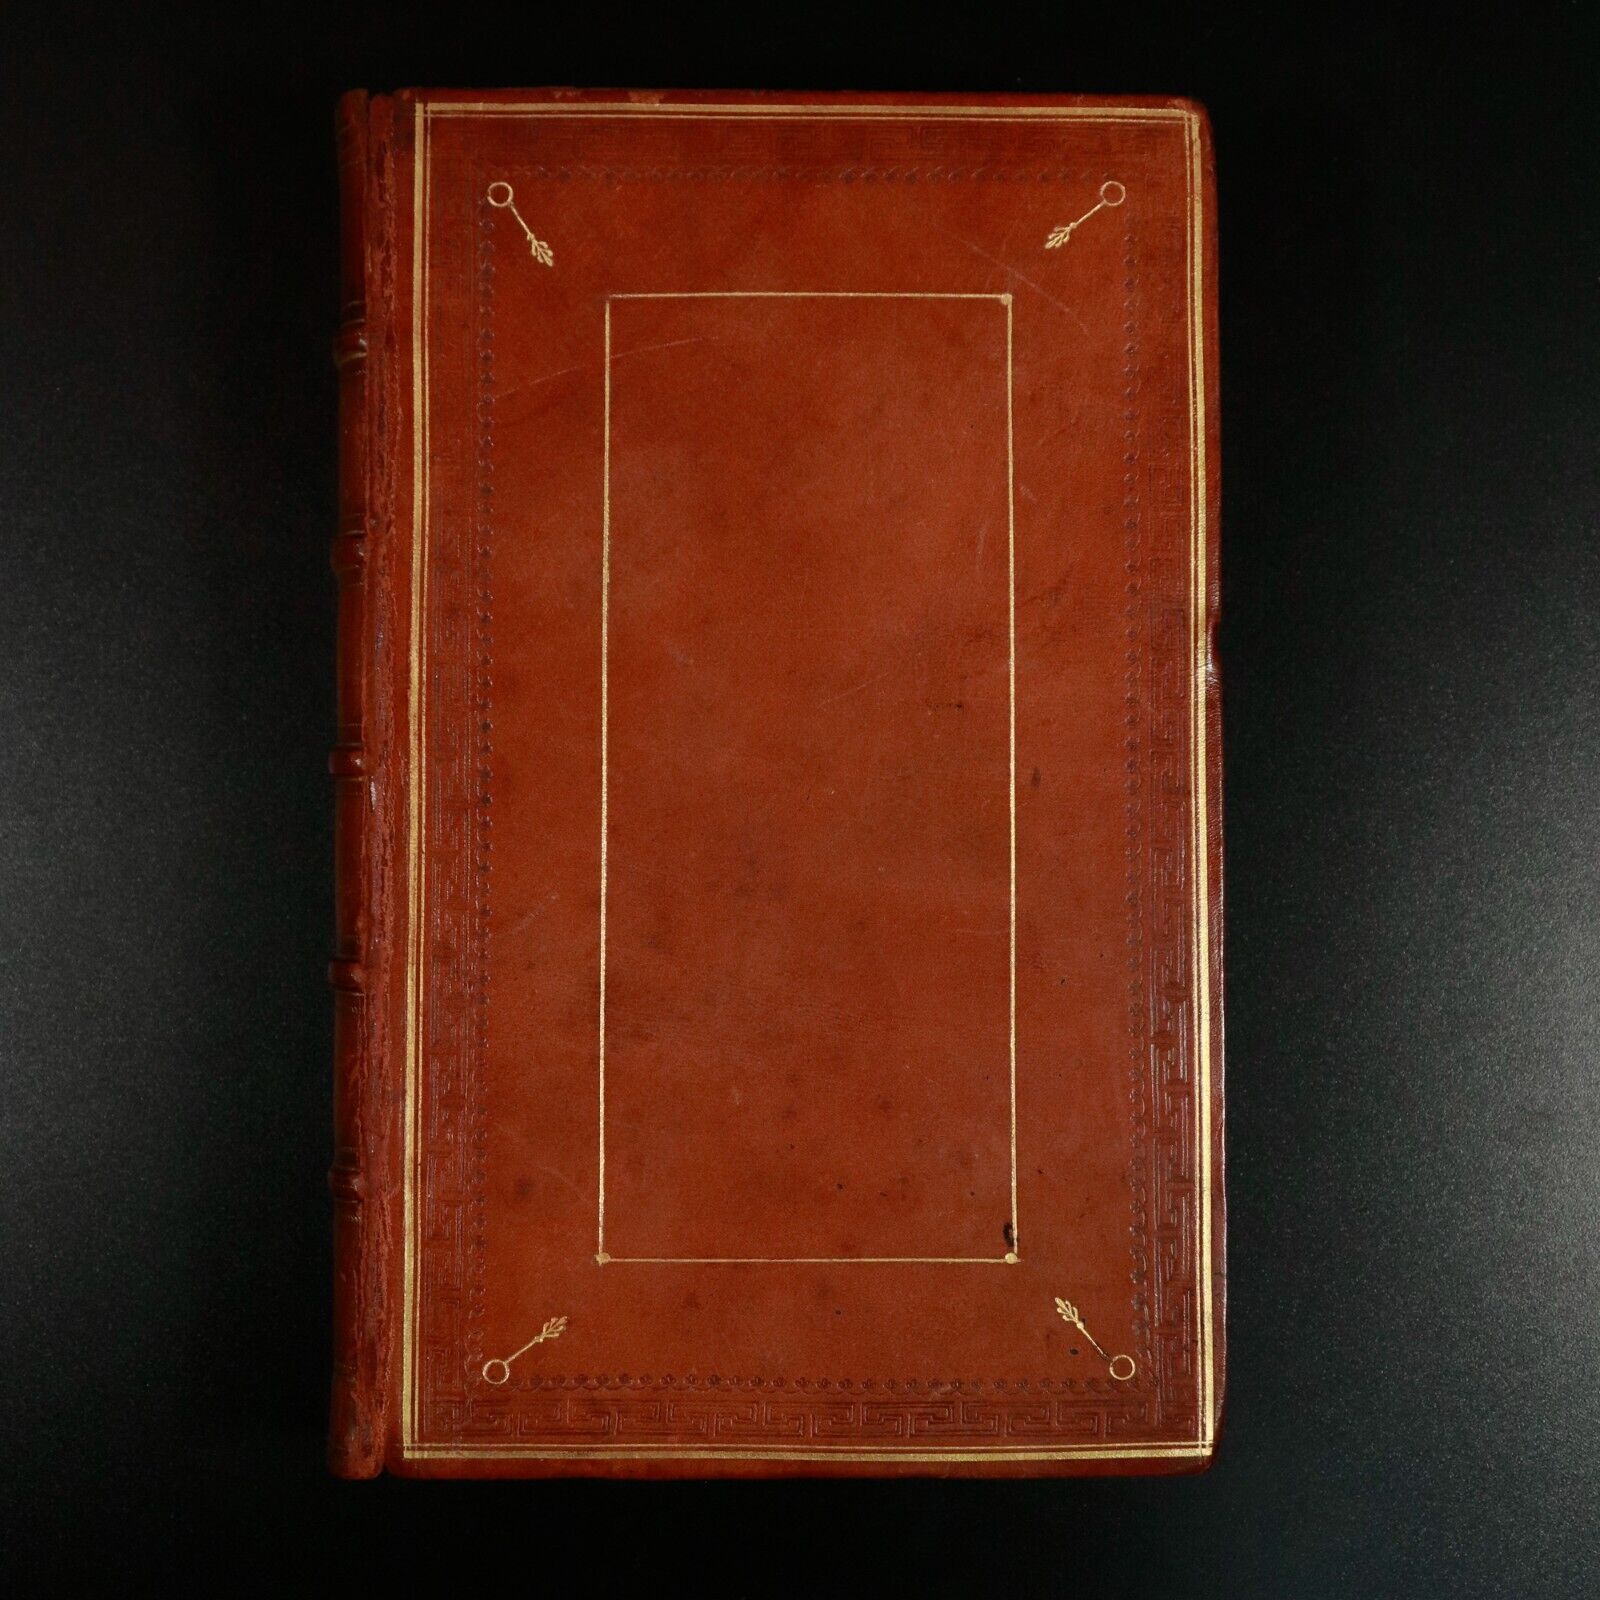 1806 Journal Of The Transactions In Scotland by R. Bannatyne - Antiquarian Book